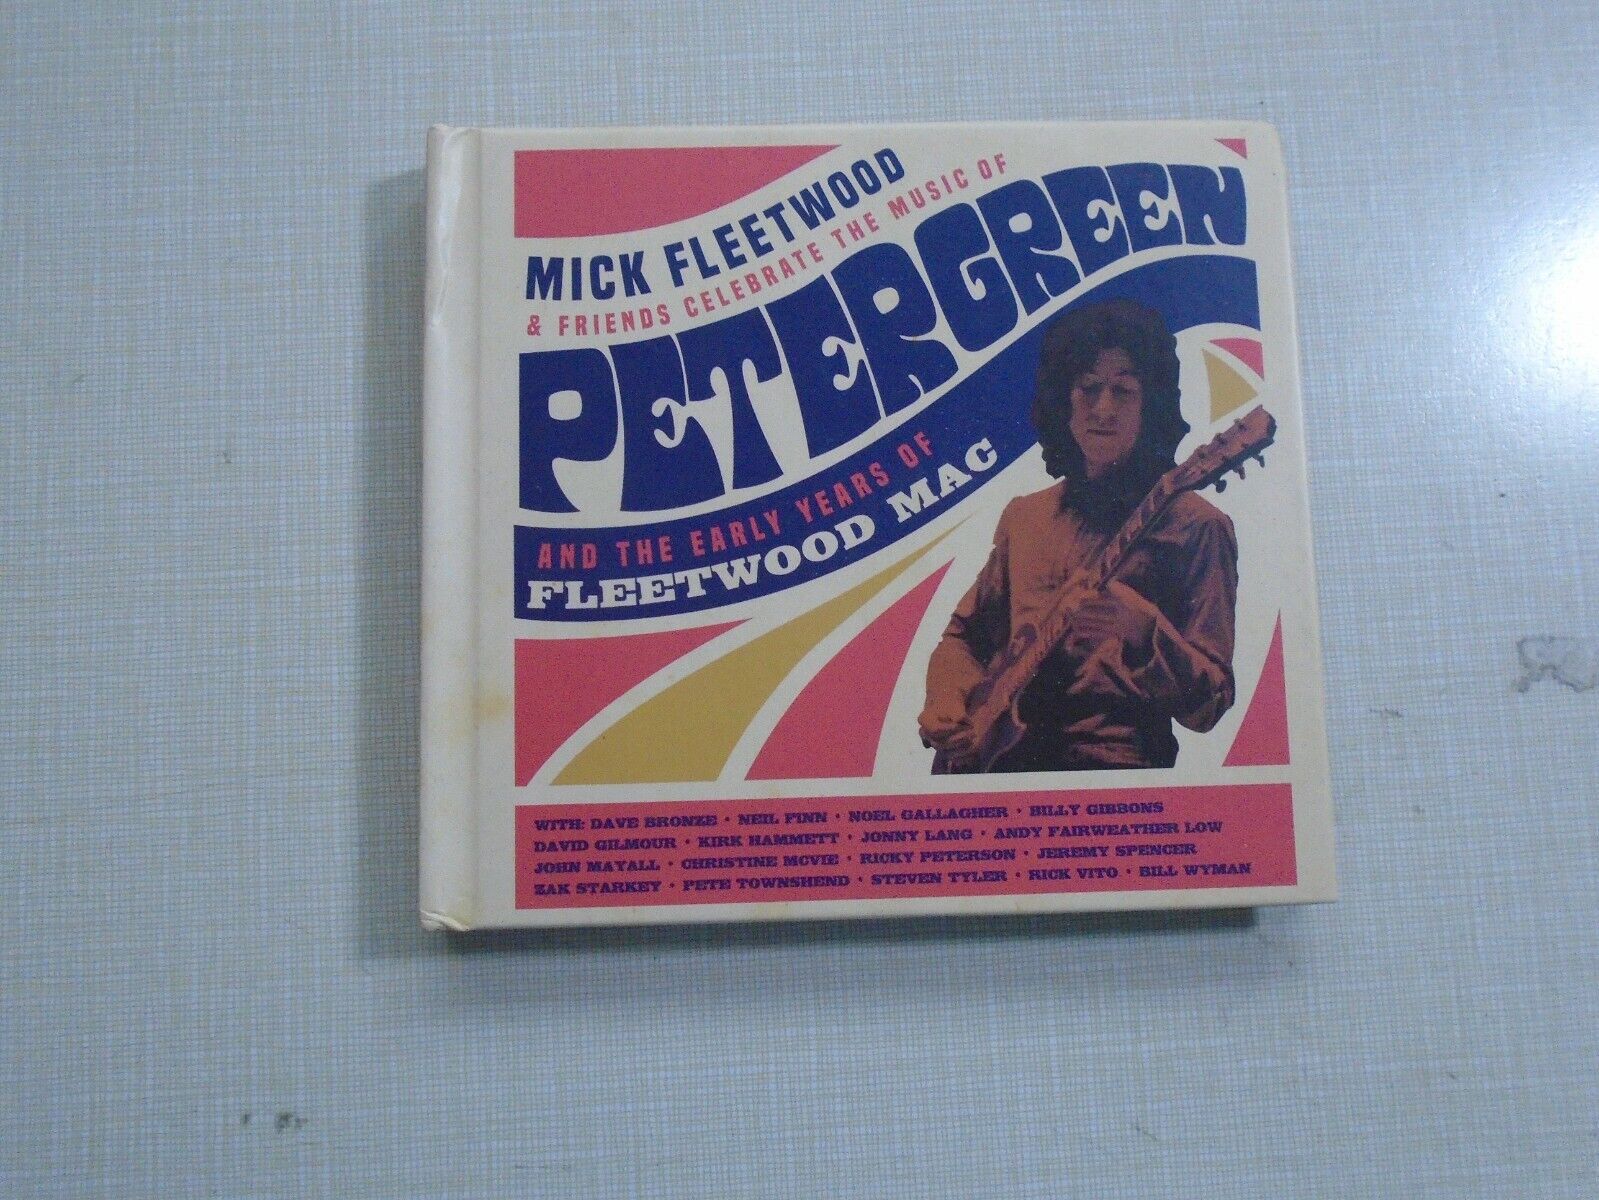 Mick Fleetwood & Friends Celebrate The Music Of Peter Green  Blu-ray + 2XCD 